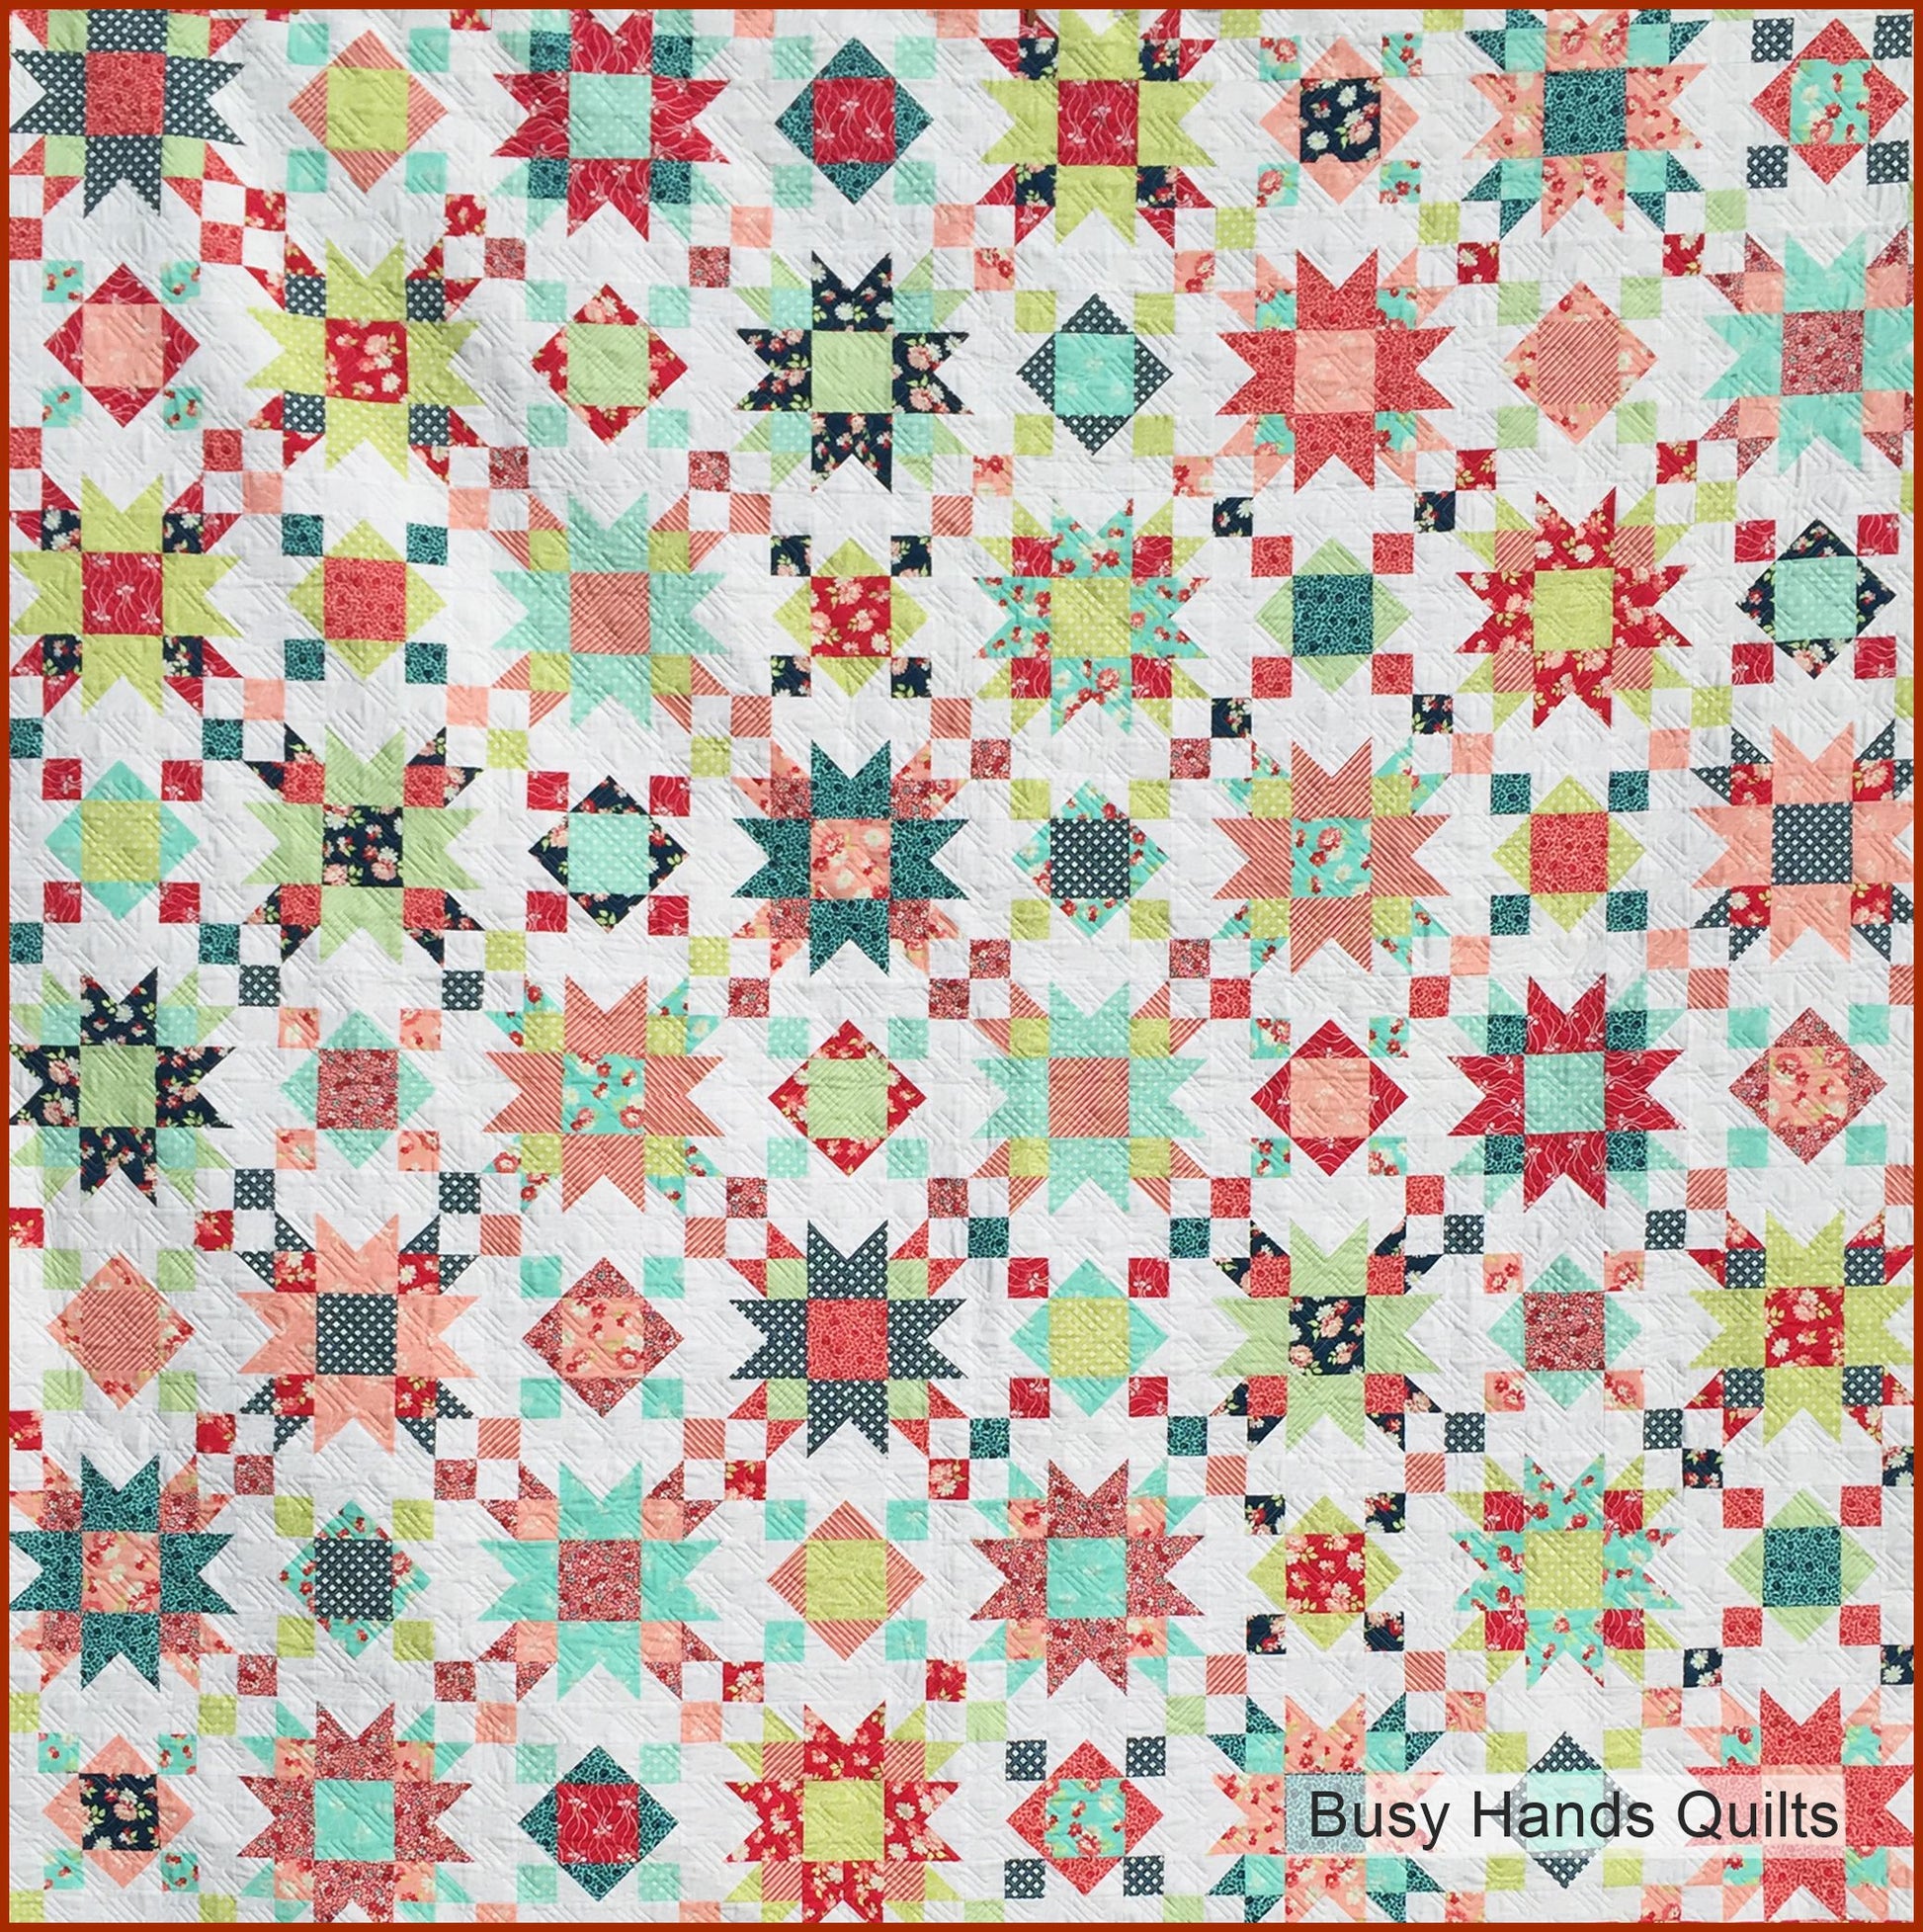 Summer on the Porch Quilt Pattern PRINTED Busy Hands Quilts {$price}